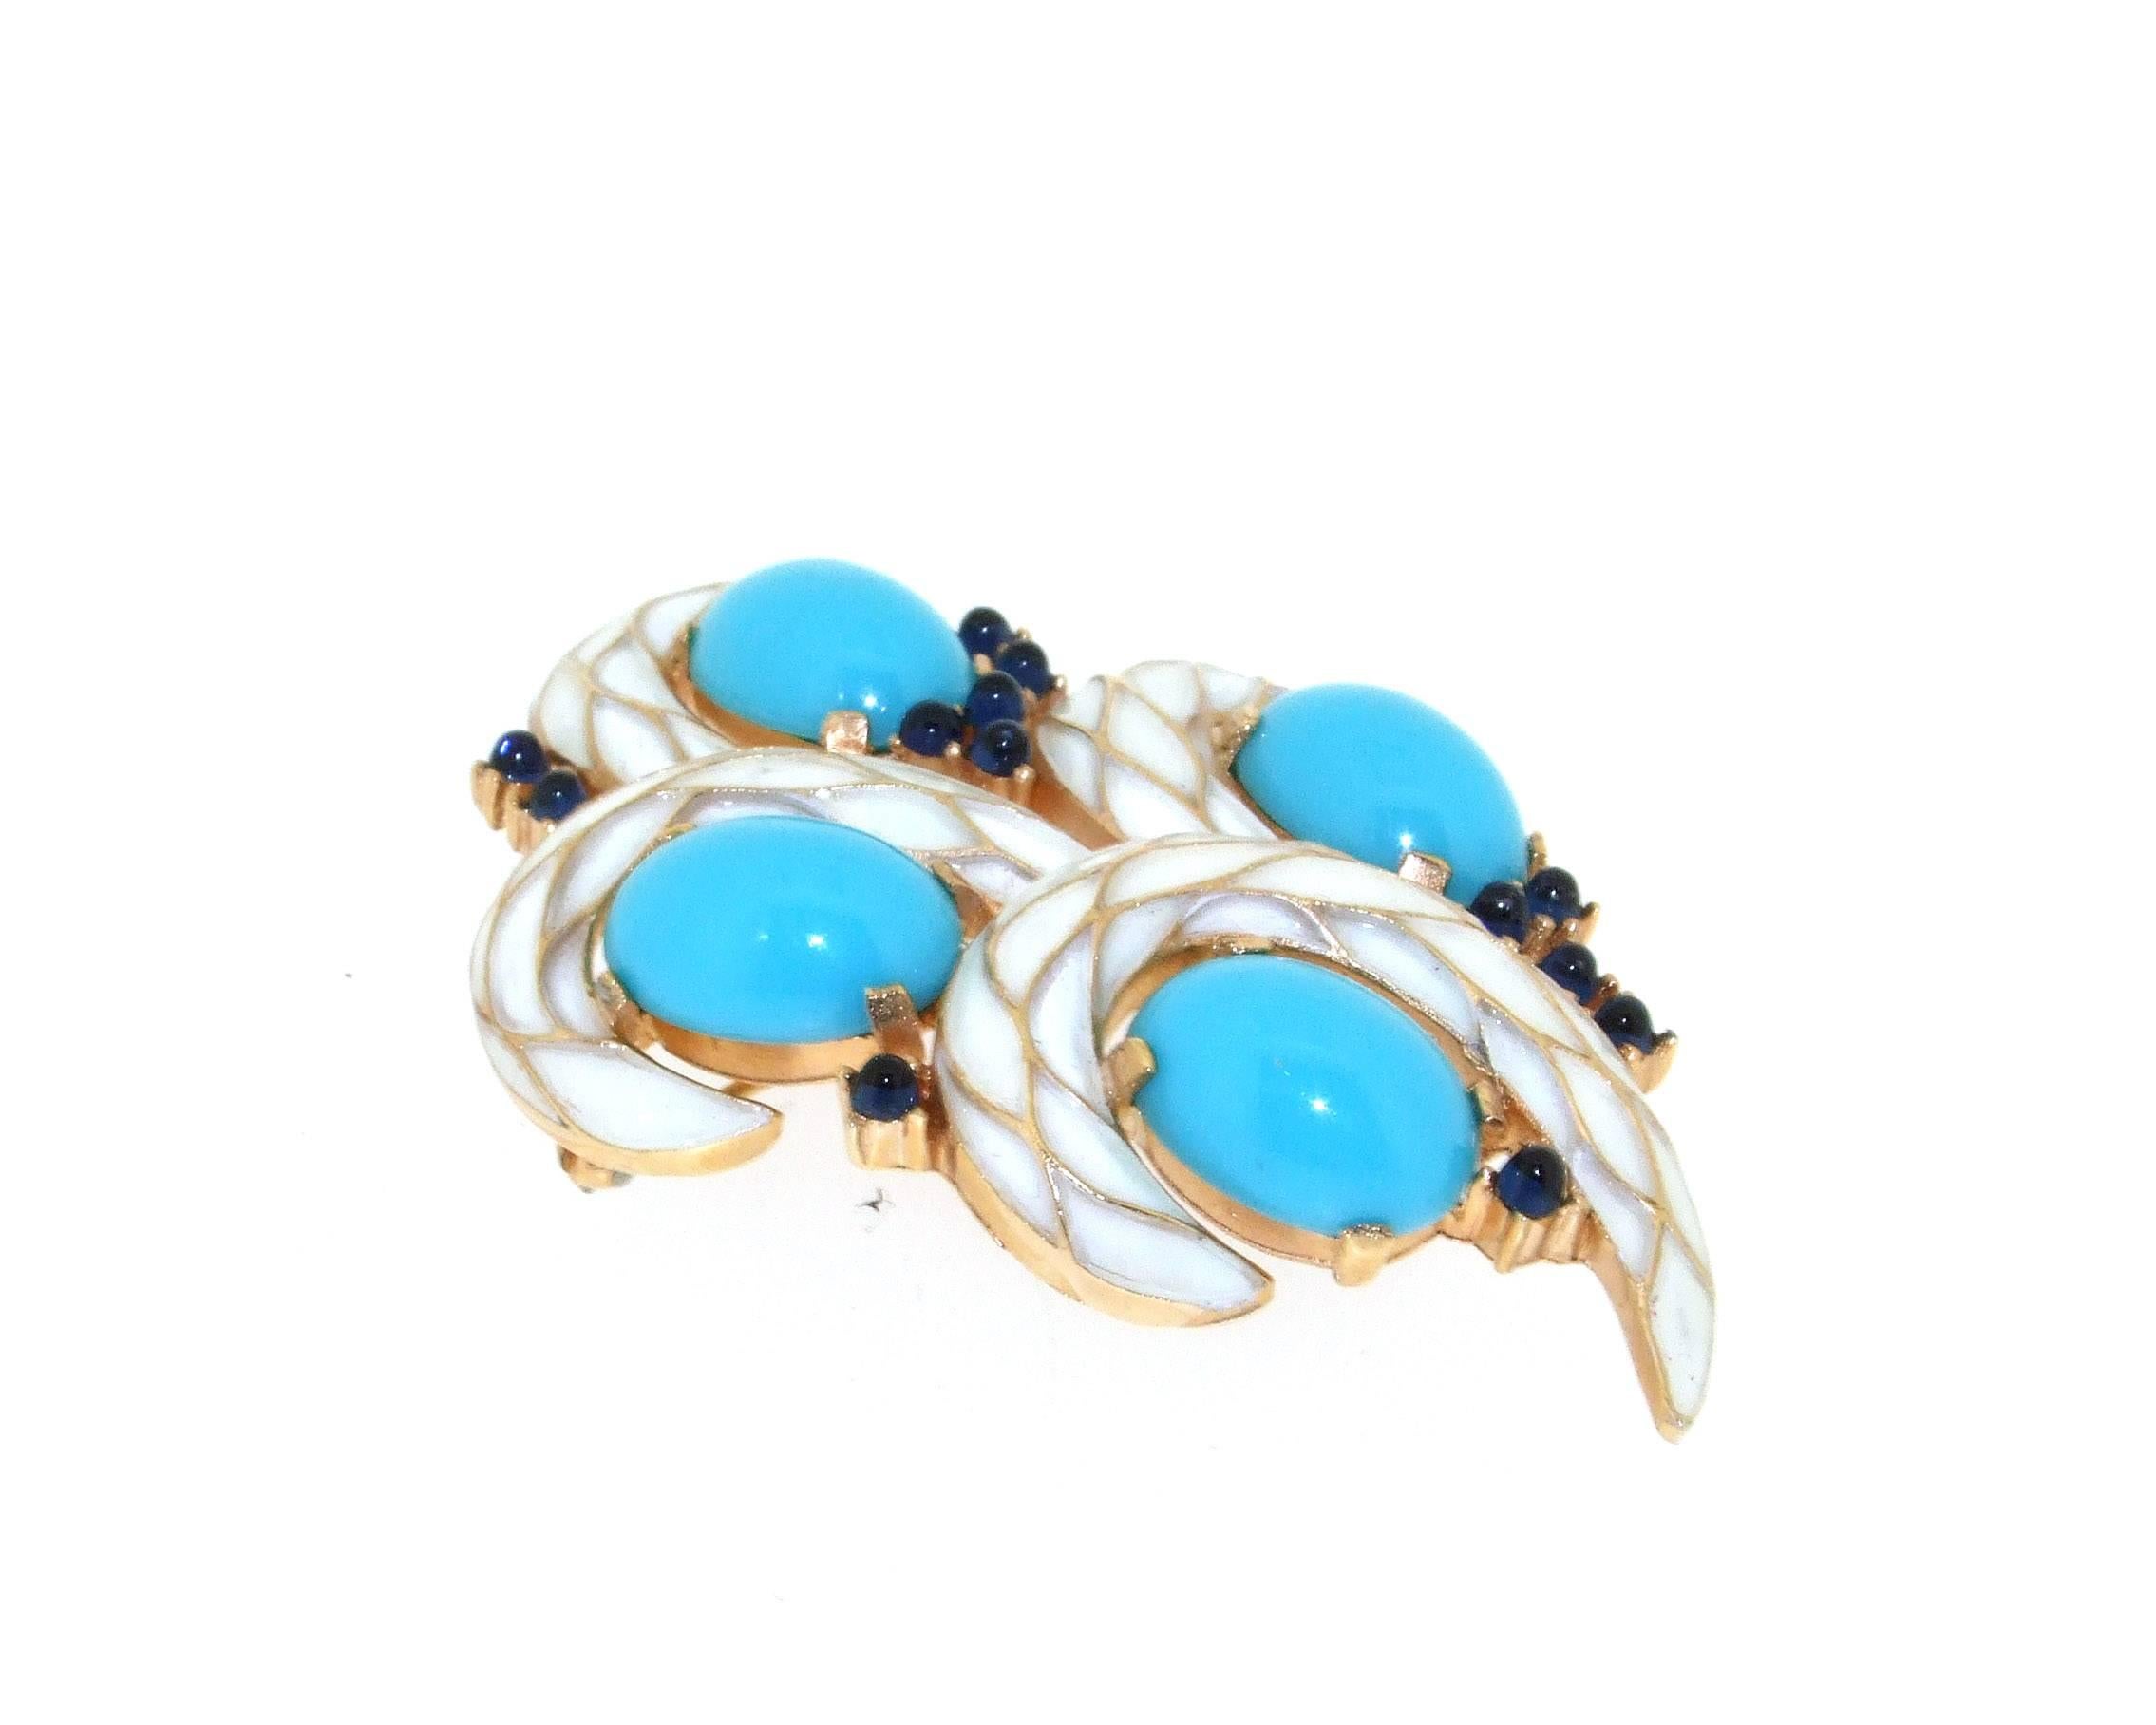 A stylish vintage brooch by Trifari, set in gold tone costume metal and decorated with white enamel, turquoise and sapphire blue glass stones. 

This piece was made as part of the L'Orient collection in 1968.

It measures 6.3cm high by 4.1cm